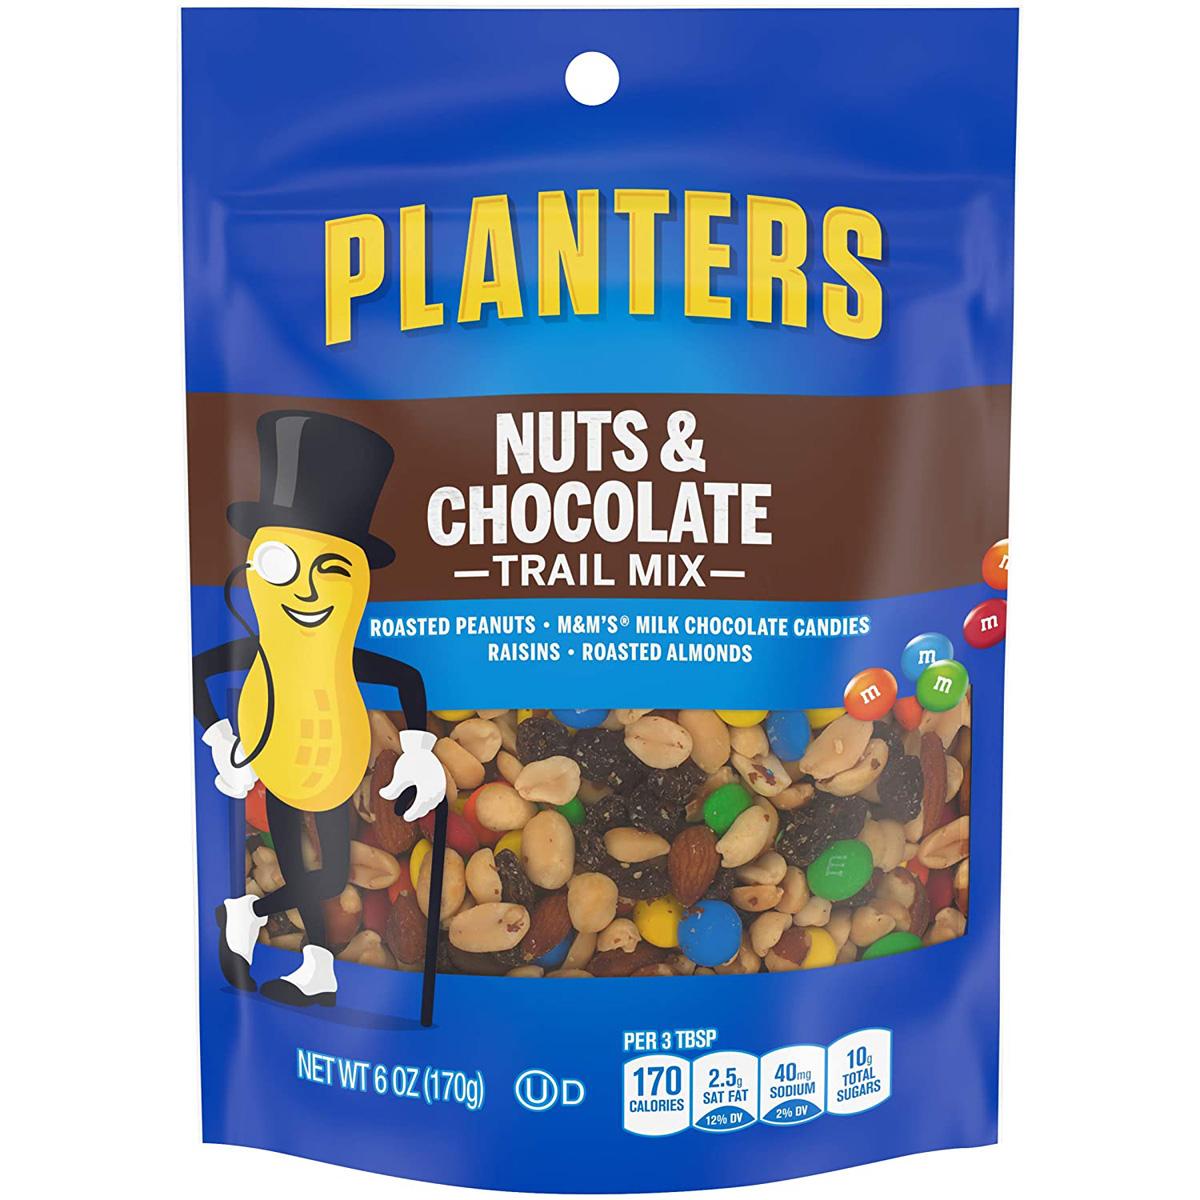 6oz Planters Nuts and Chocolate MMs Trail Mix for 1.90 Shipped